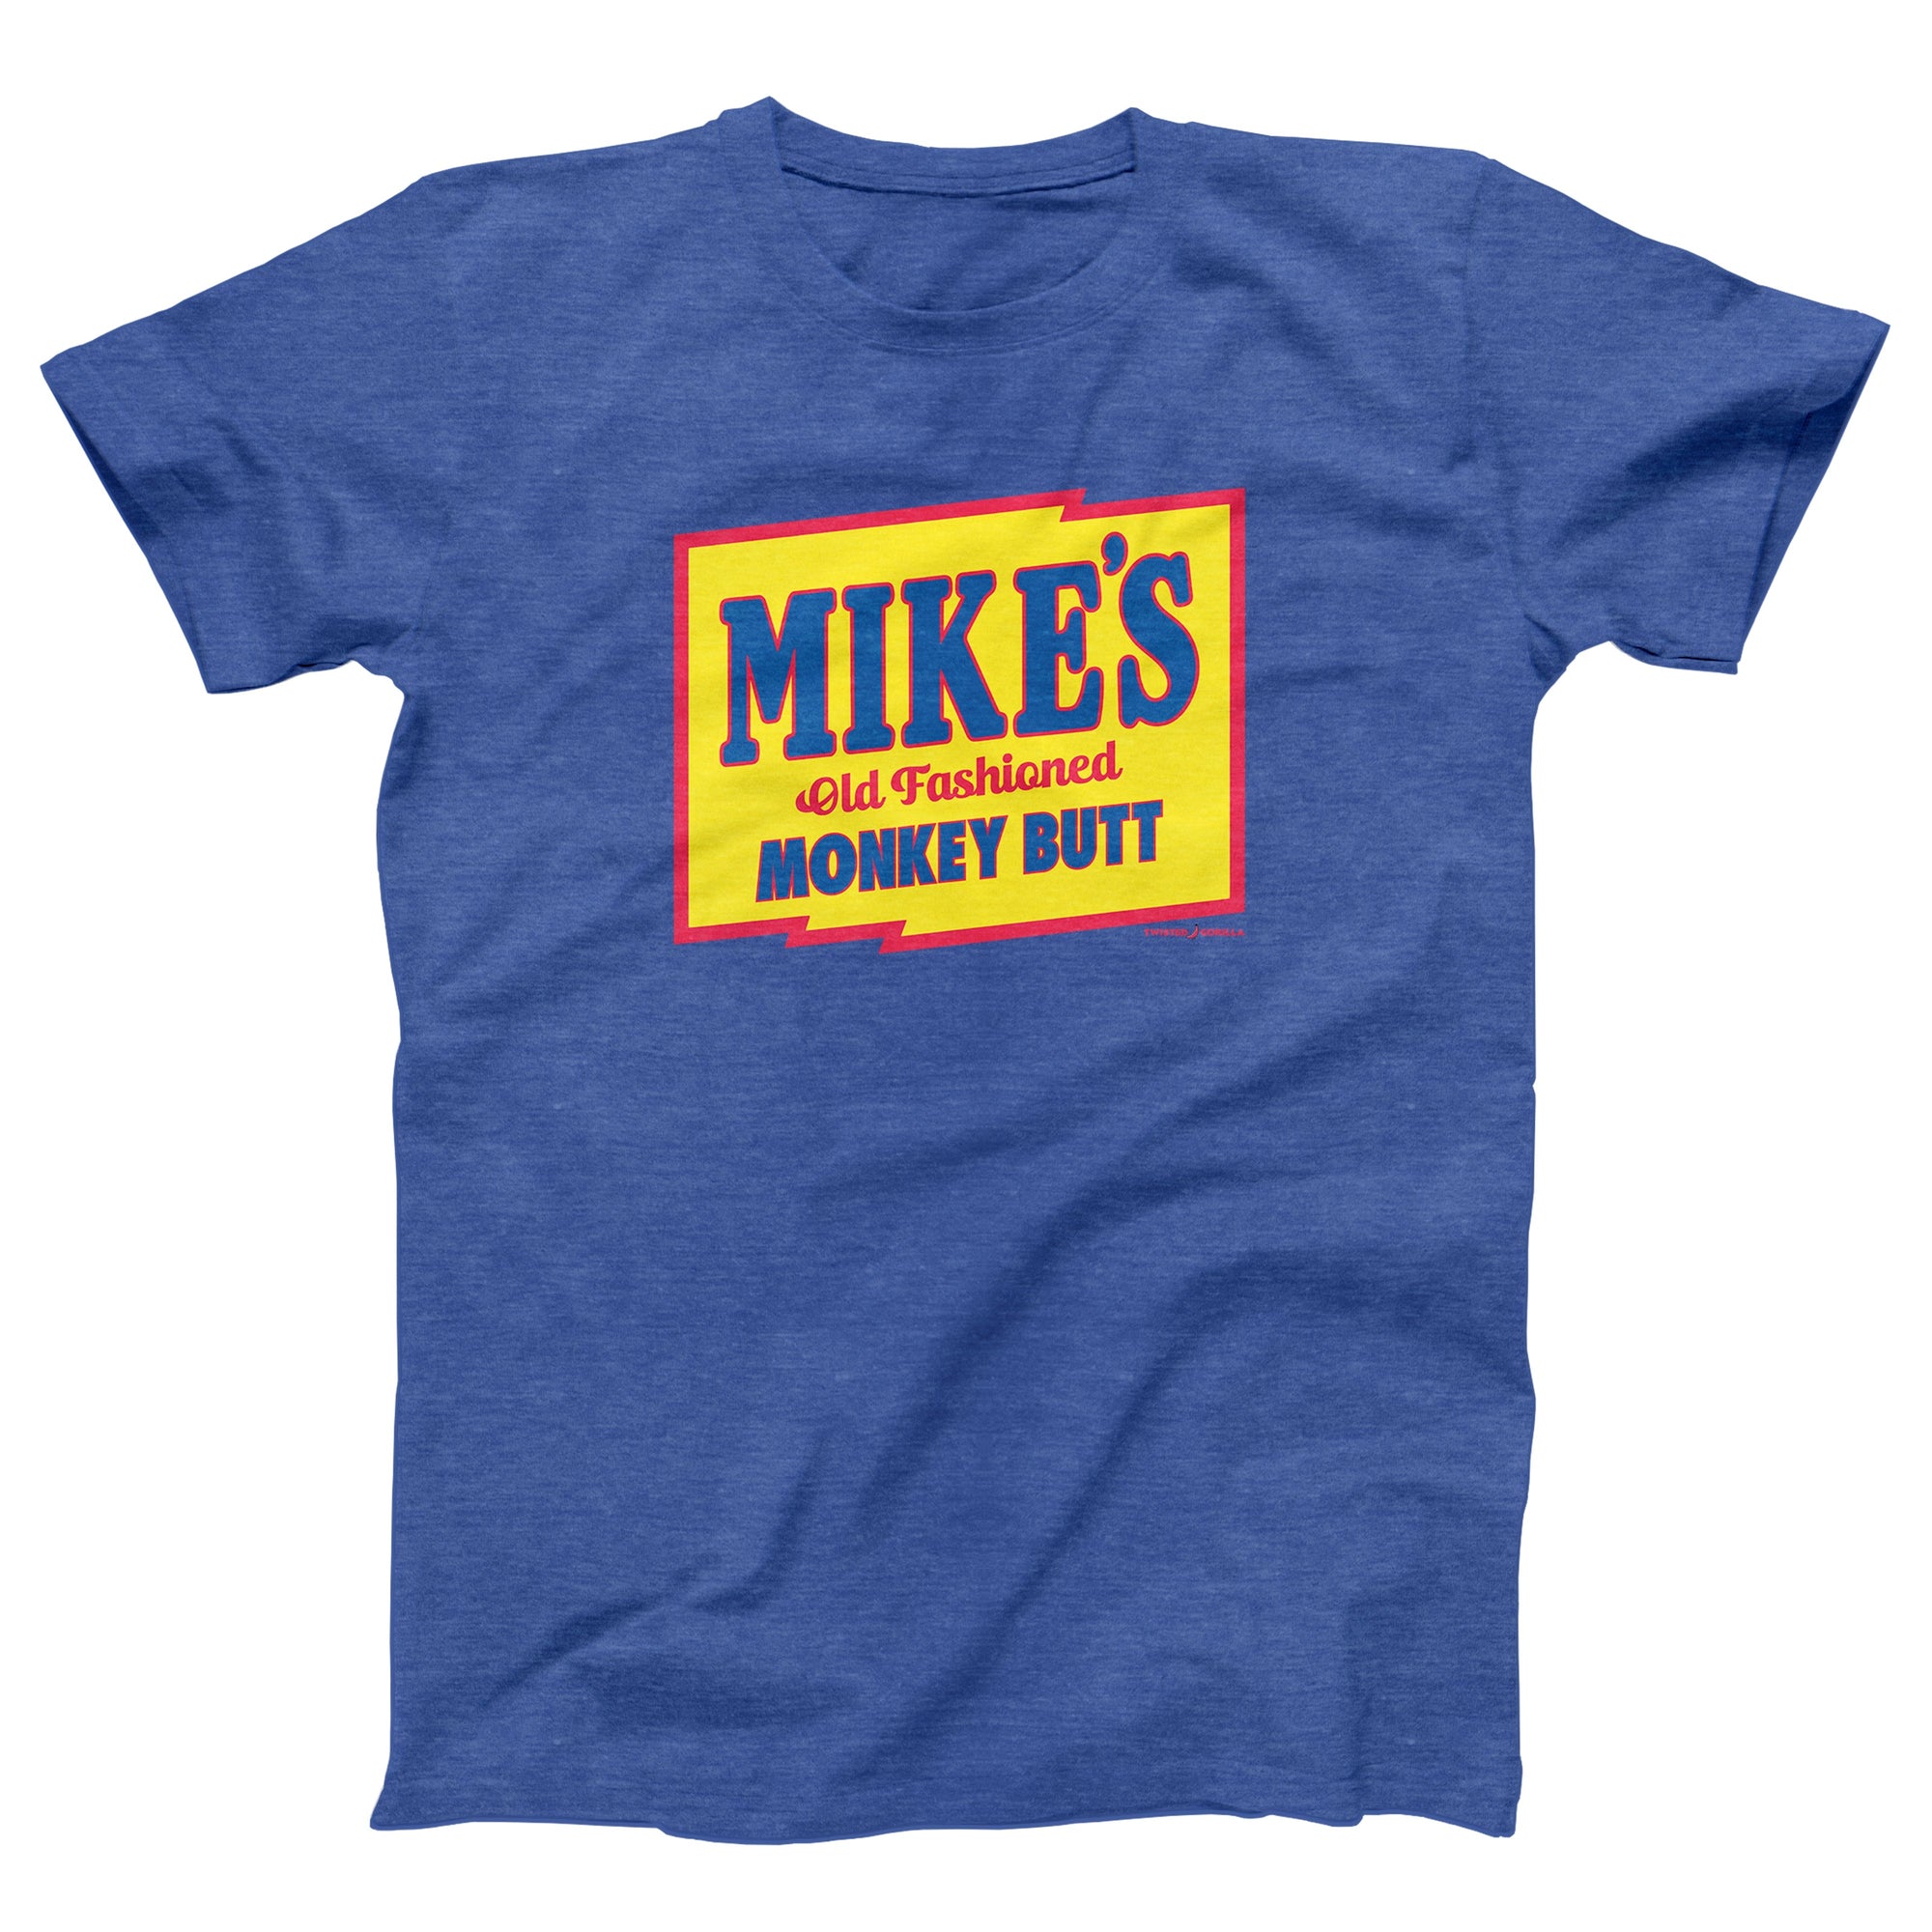 Mike's Monkey Butt Adult Unisex T-Shirt - Twisted Gorilla